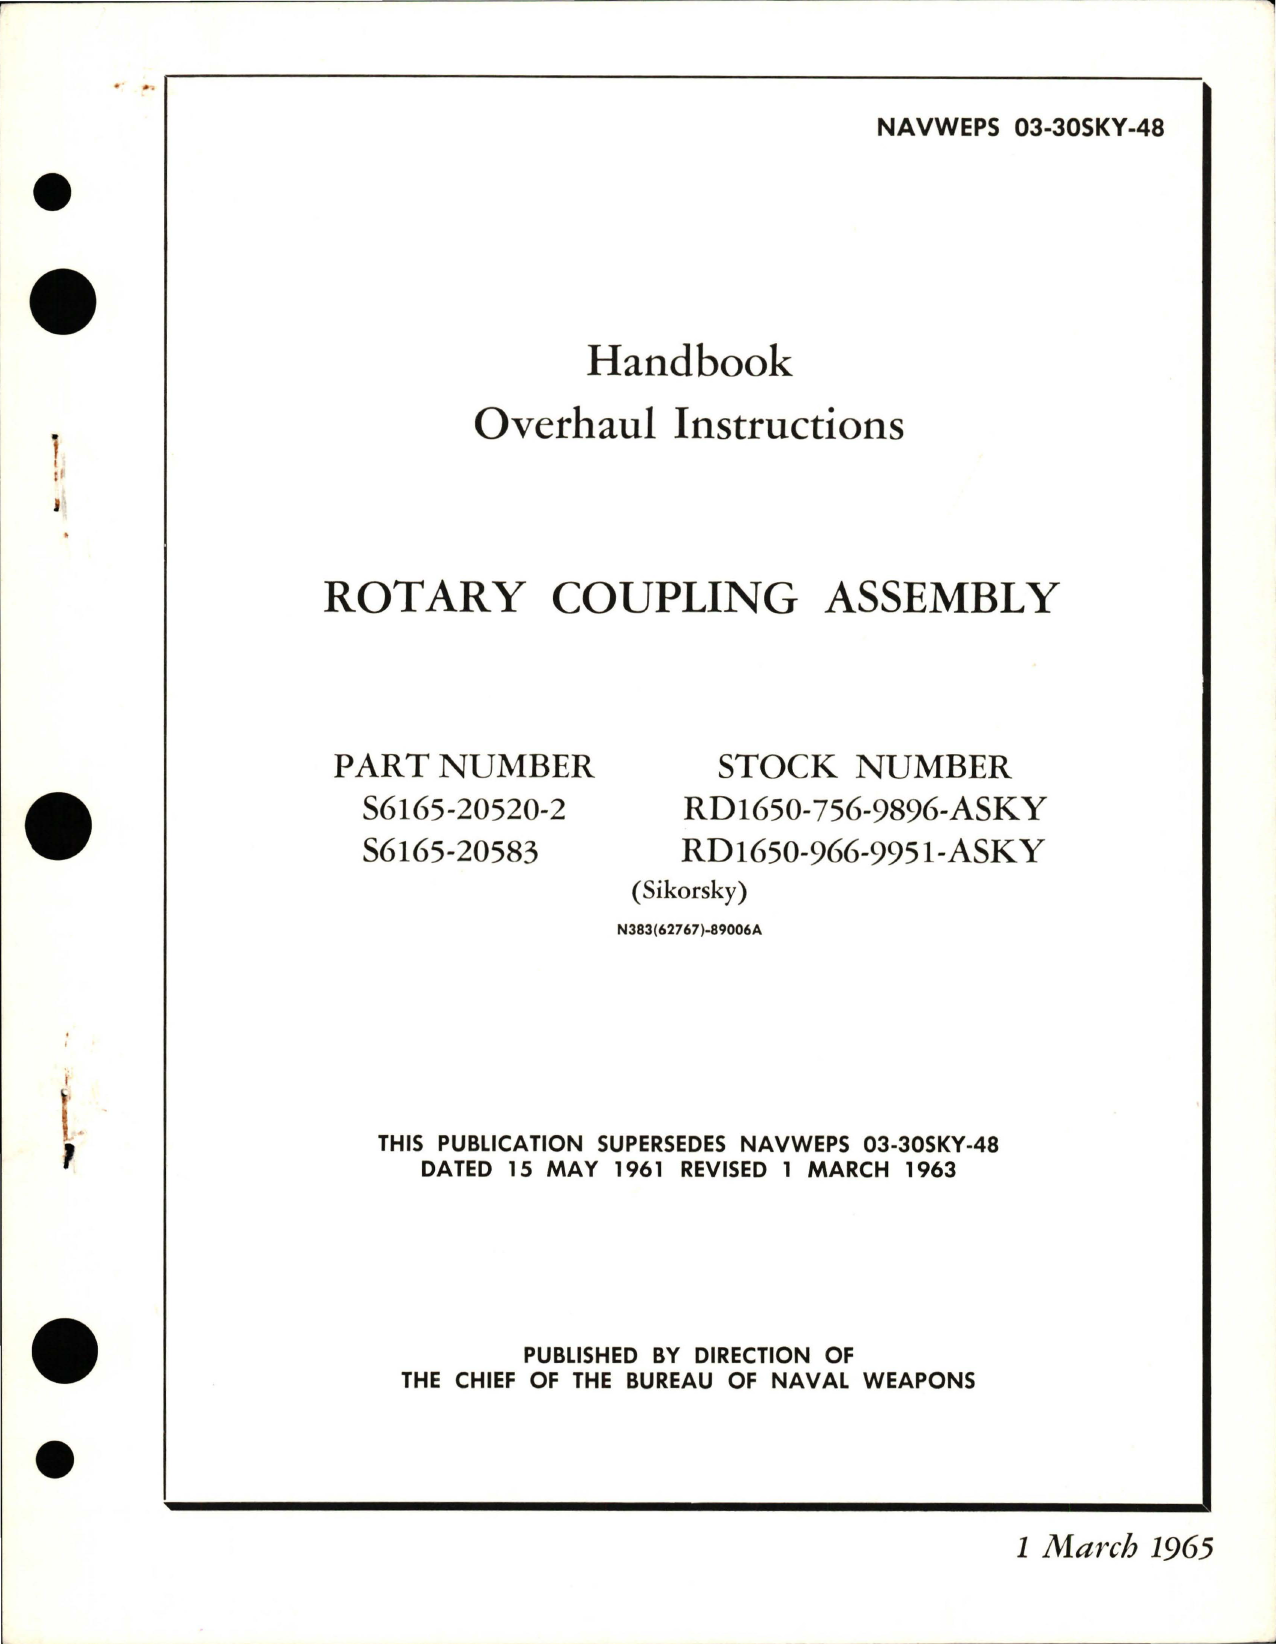 Sample page 1 from AirCorps Library document: Overhaul Instructions for Rotary Coupling Assembly - Parts S6165-20520-2 and S6165-20583